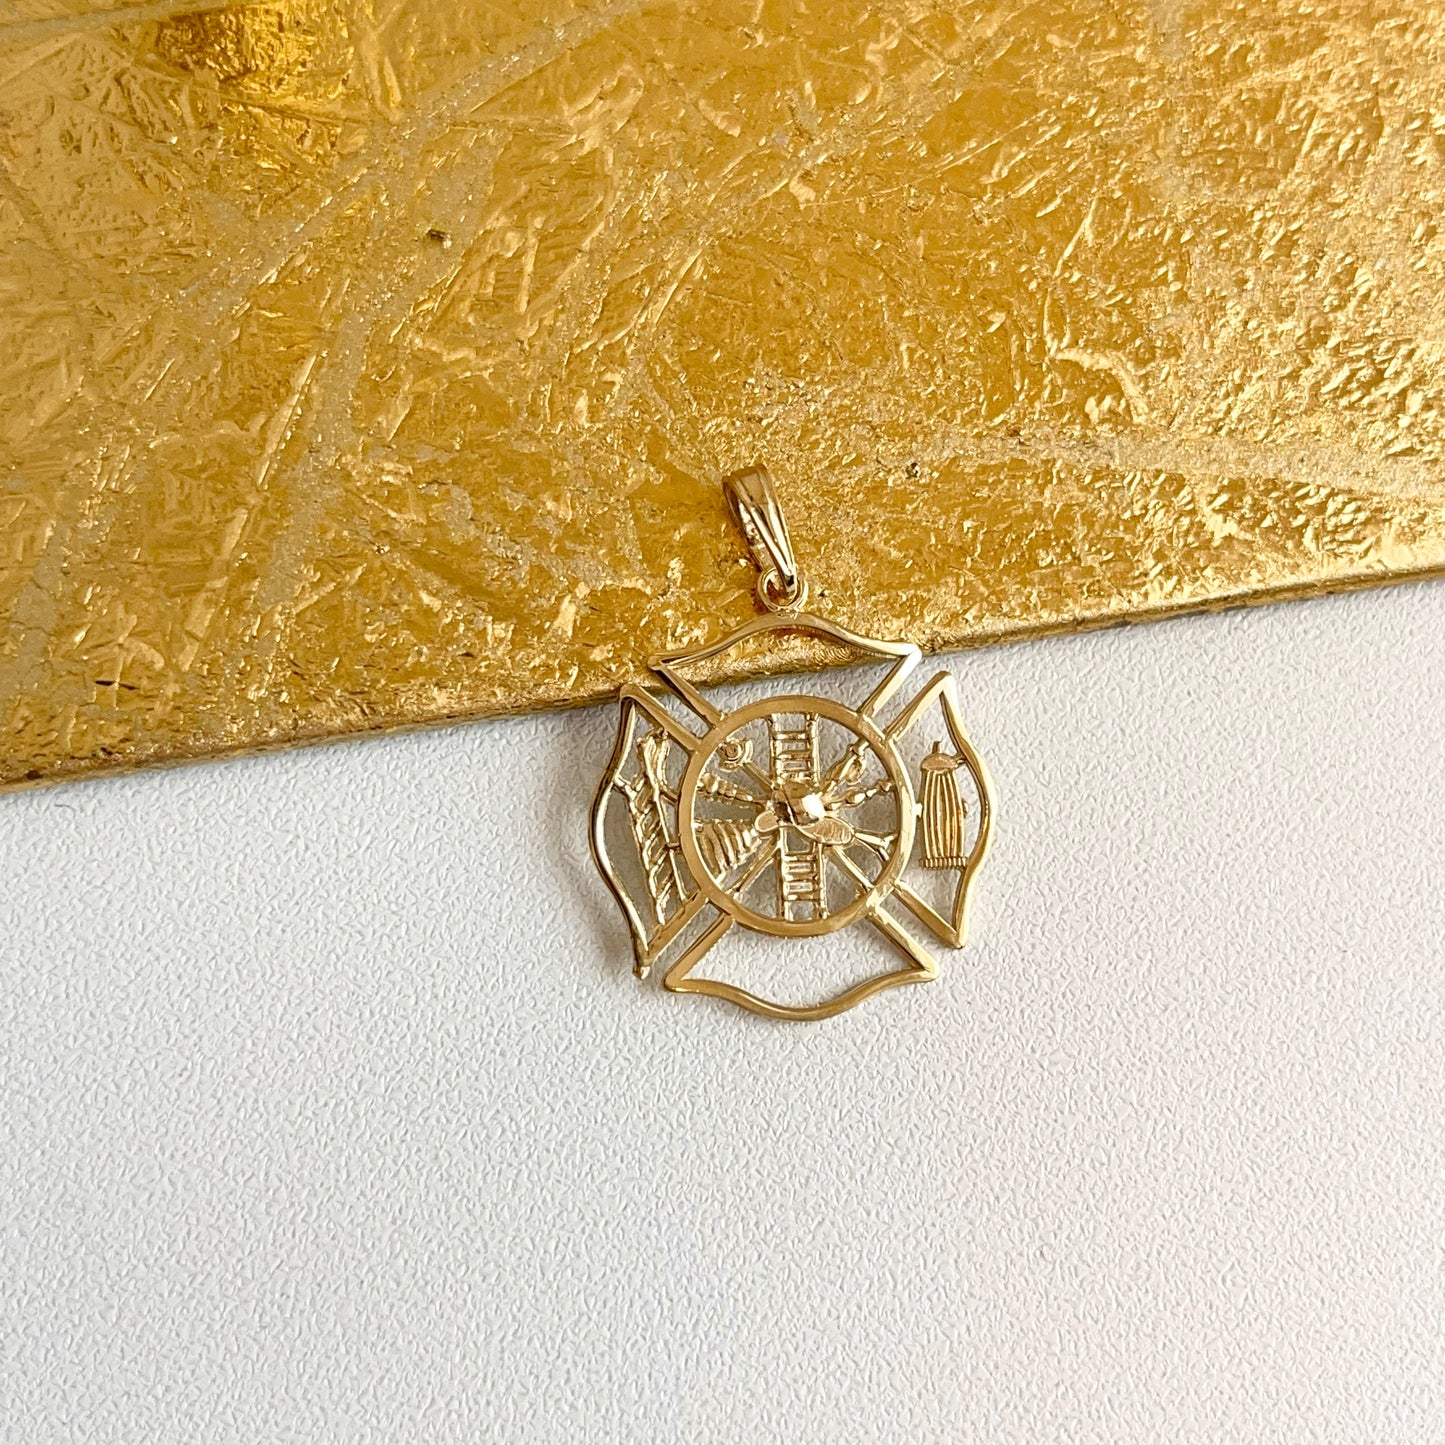 10KT Yellow Gold Cut-Out Firefighter Shield Pendant